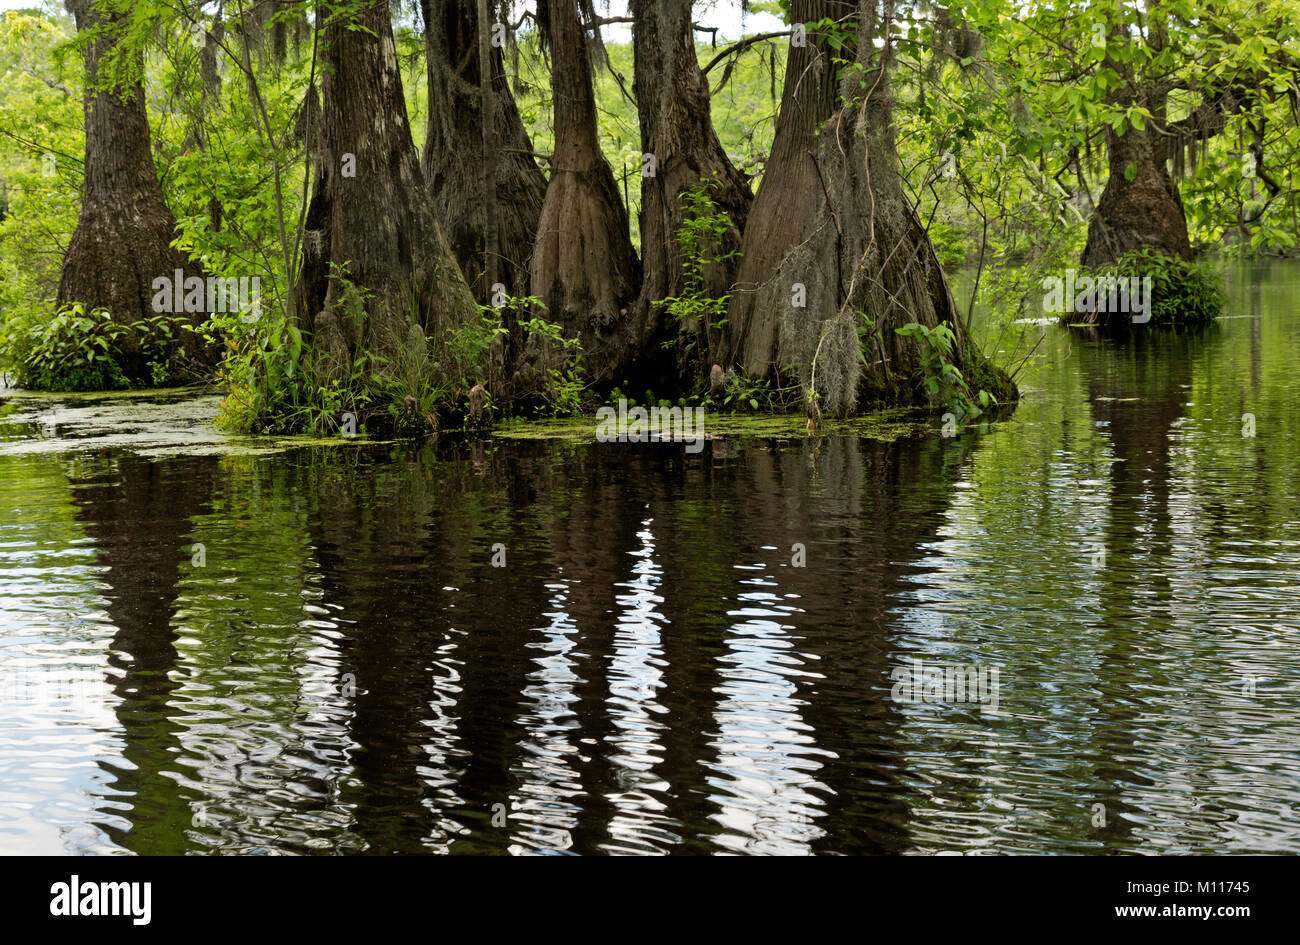 NC01454--00...NORTH CAROLINA - A group trees rising out of the cypress swamp and reflecting in the still waters of Merchant Millpond in Merchant Millp Stock Photo